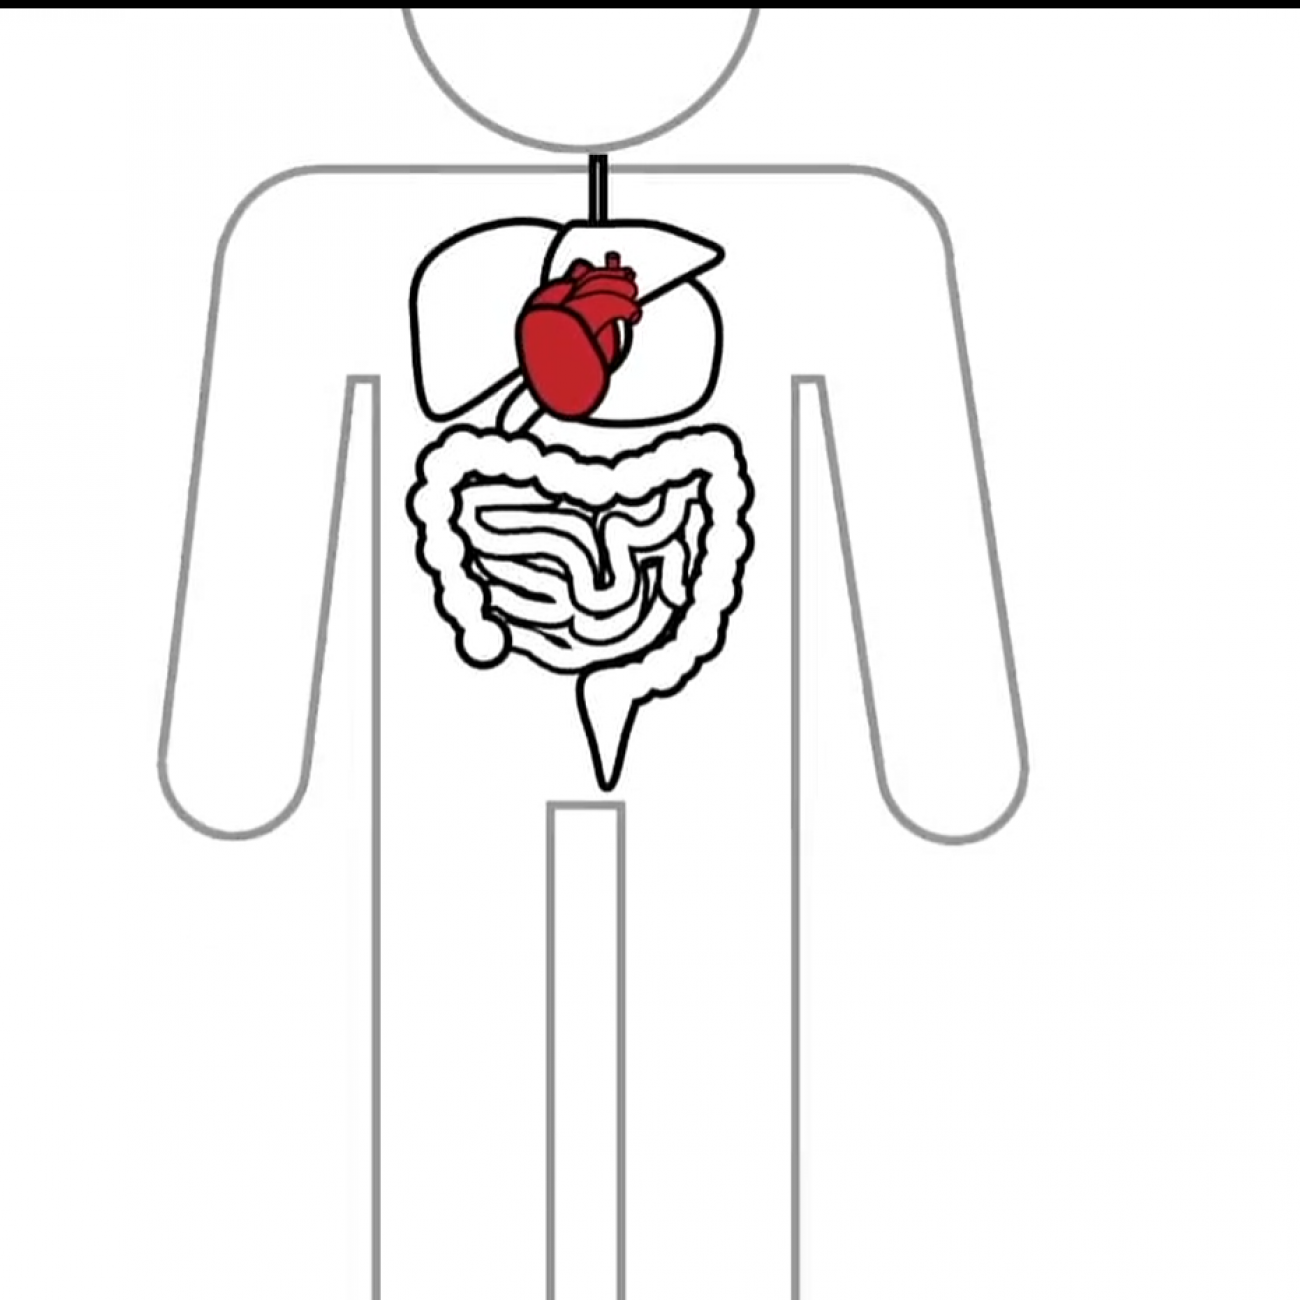 screen capture of image from animated video about organs in our body.